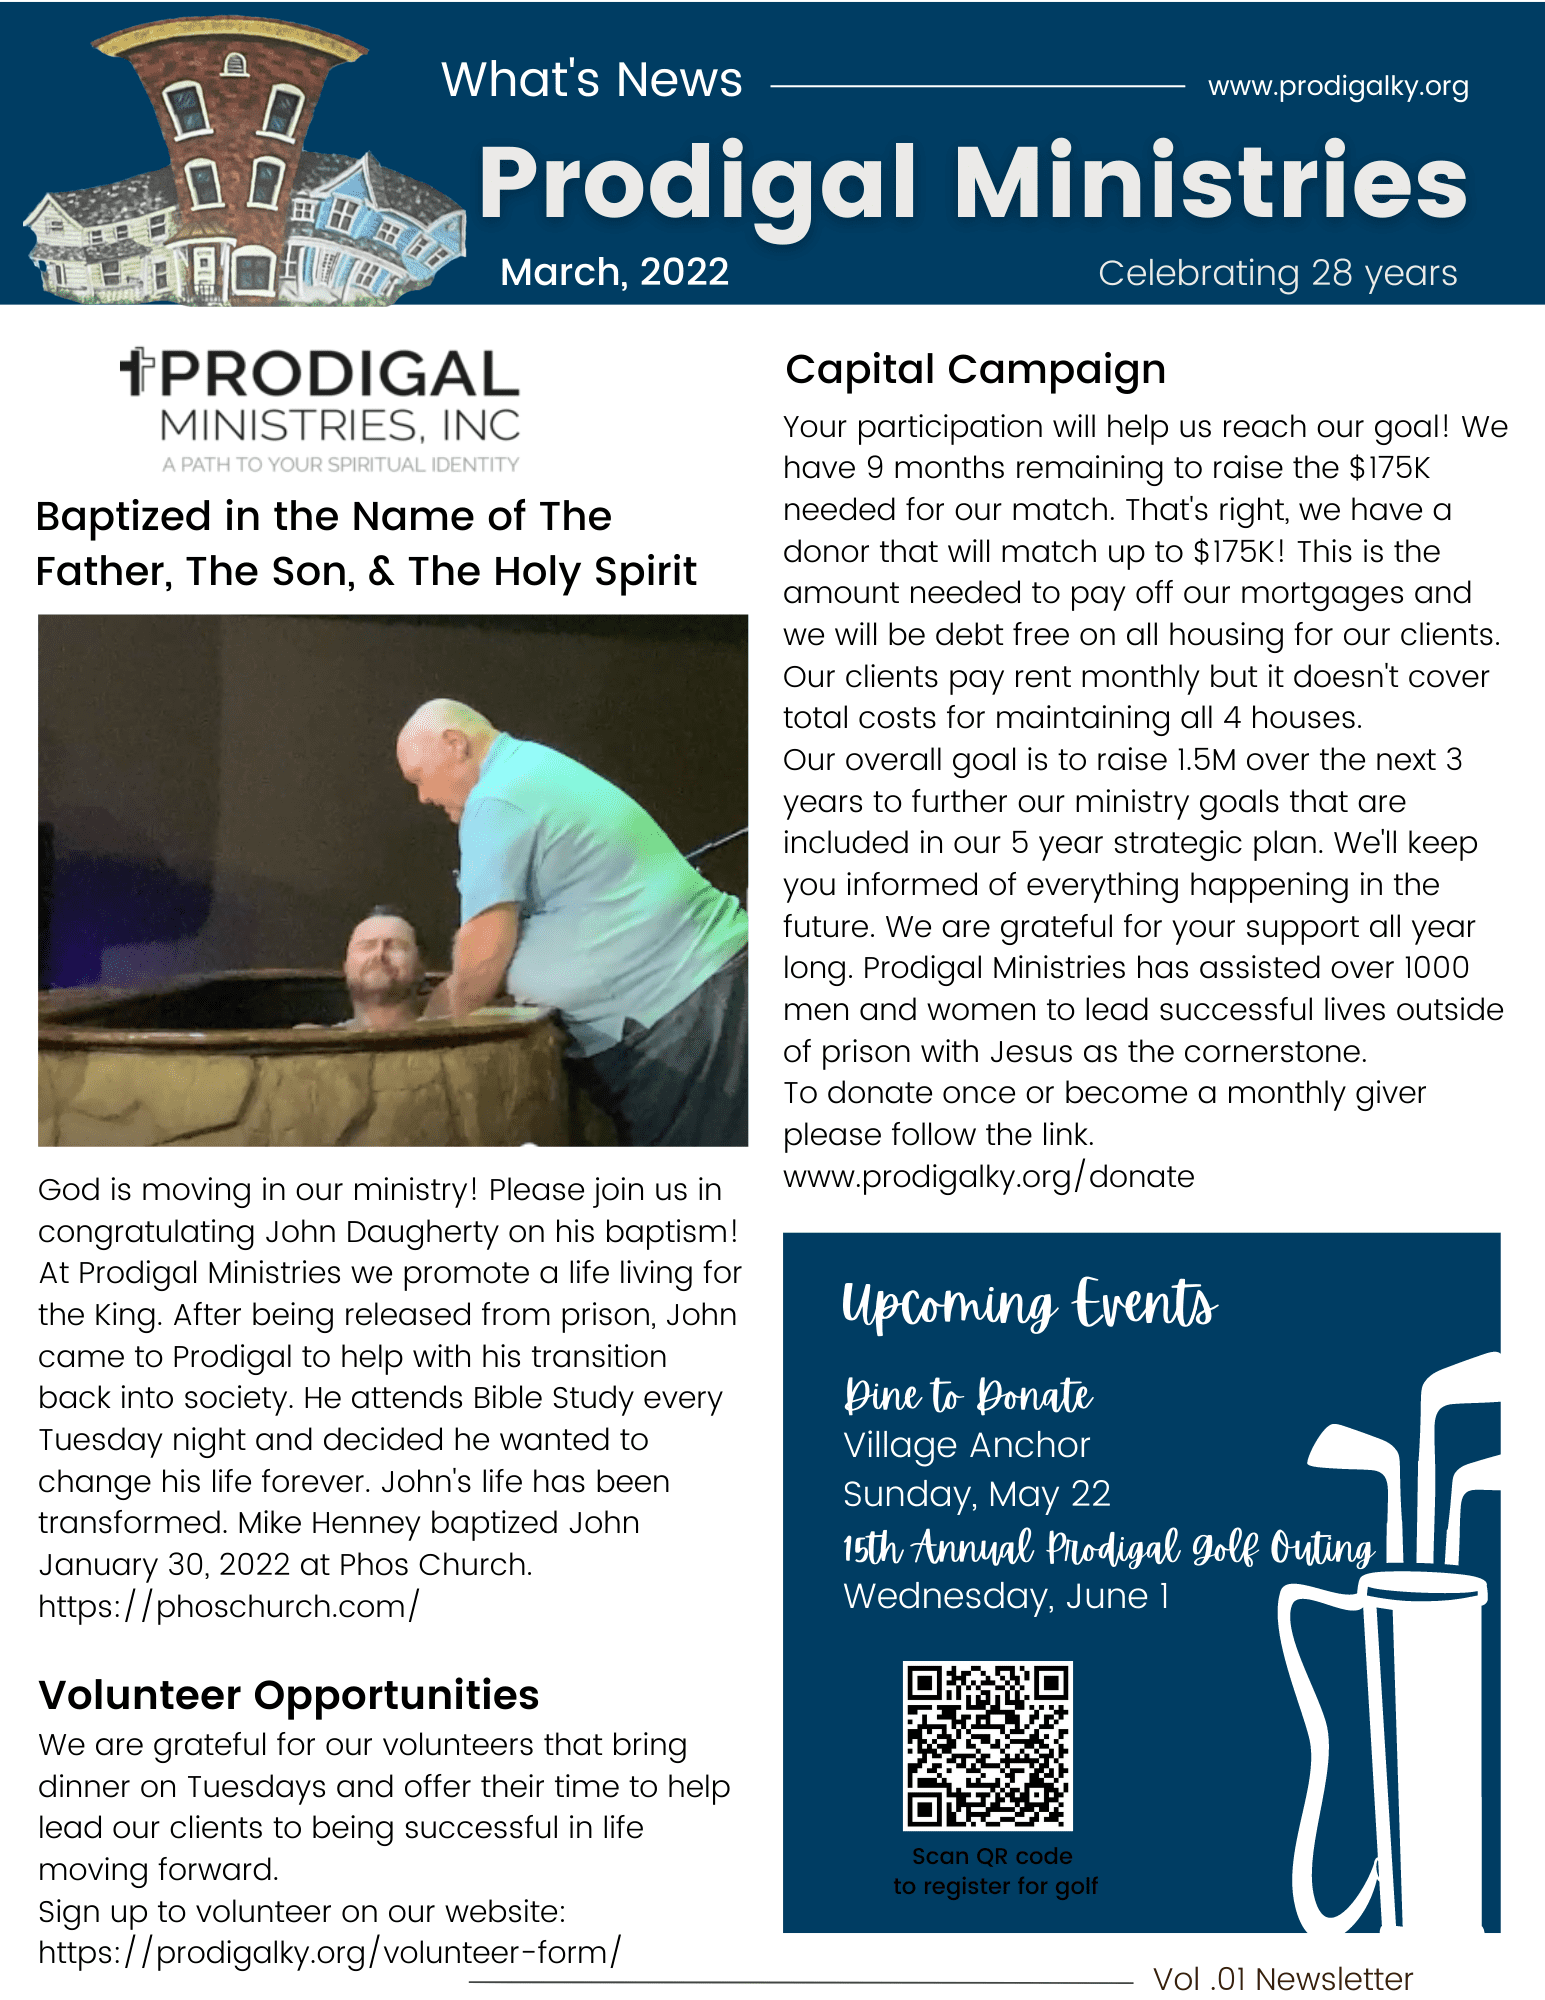 Page one of the newsletter